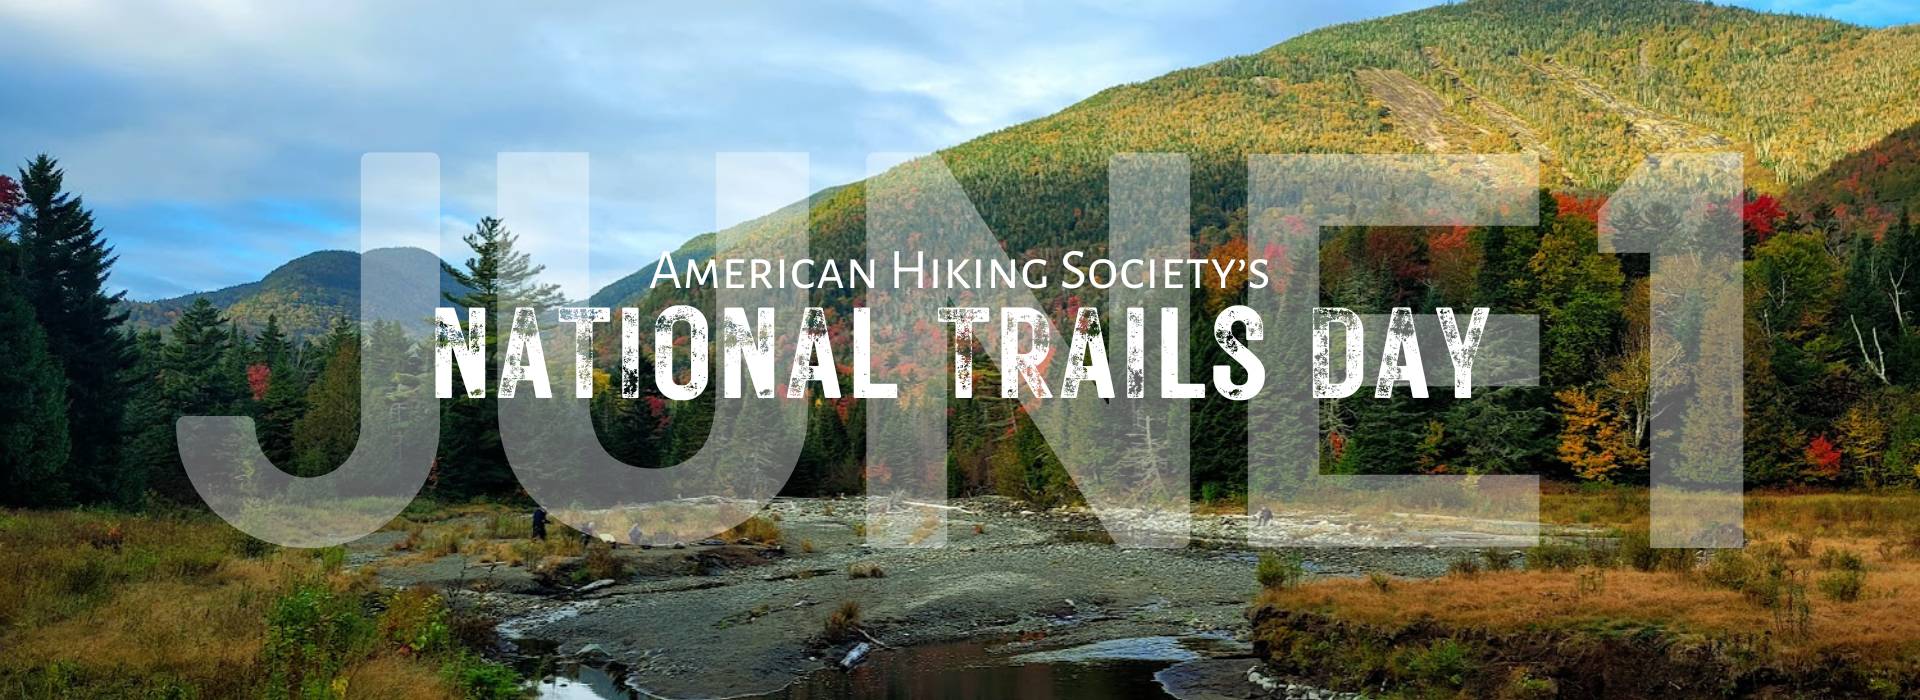 National Trails Day Hike and Trail Cleanup June 1st 9am